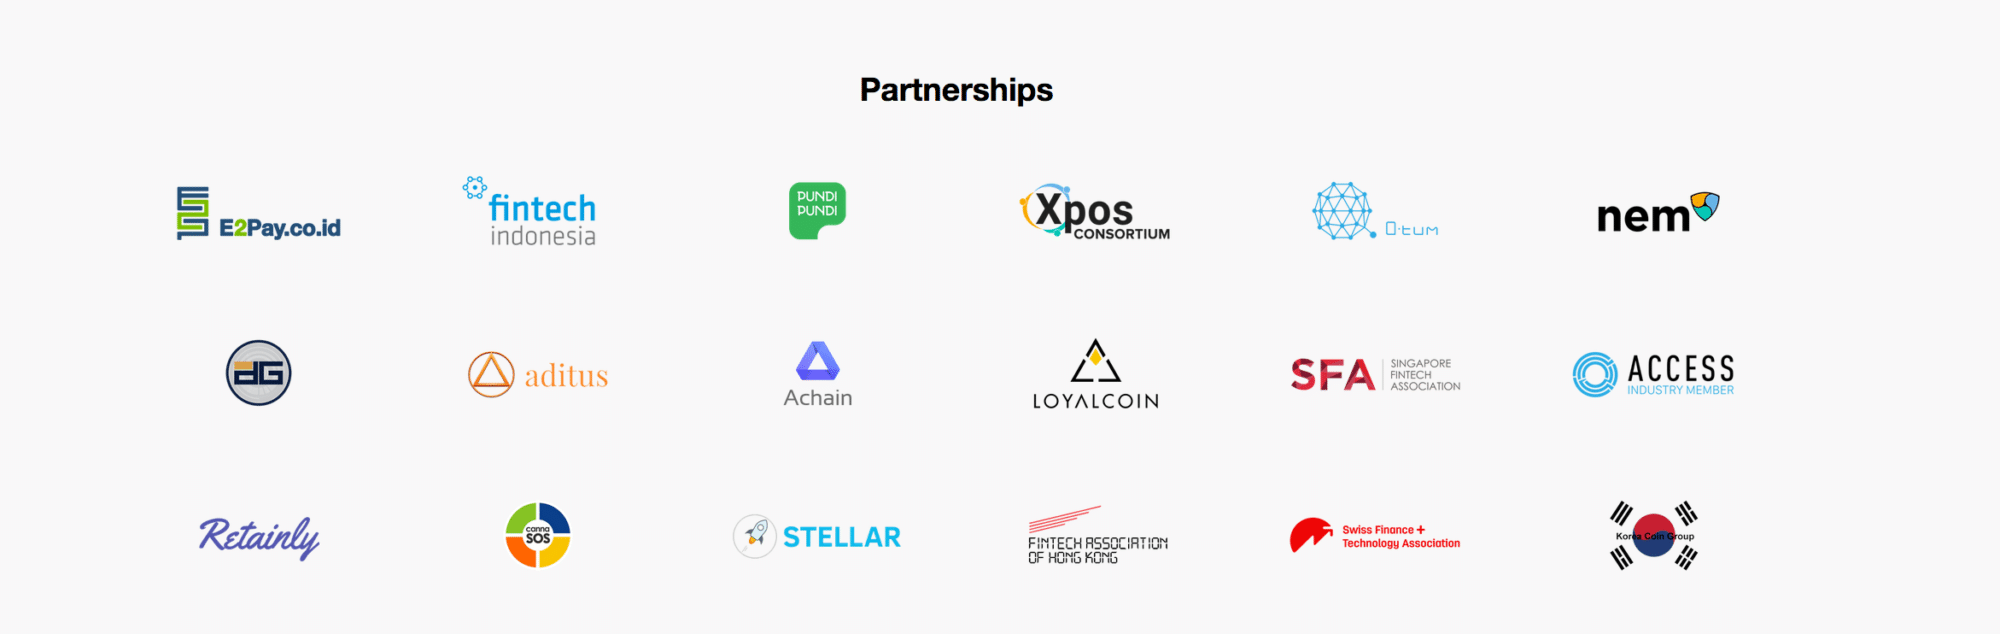 cryptocurrency partnerships 2018